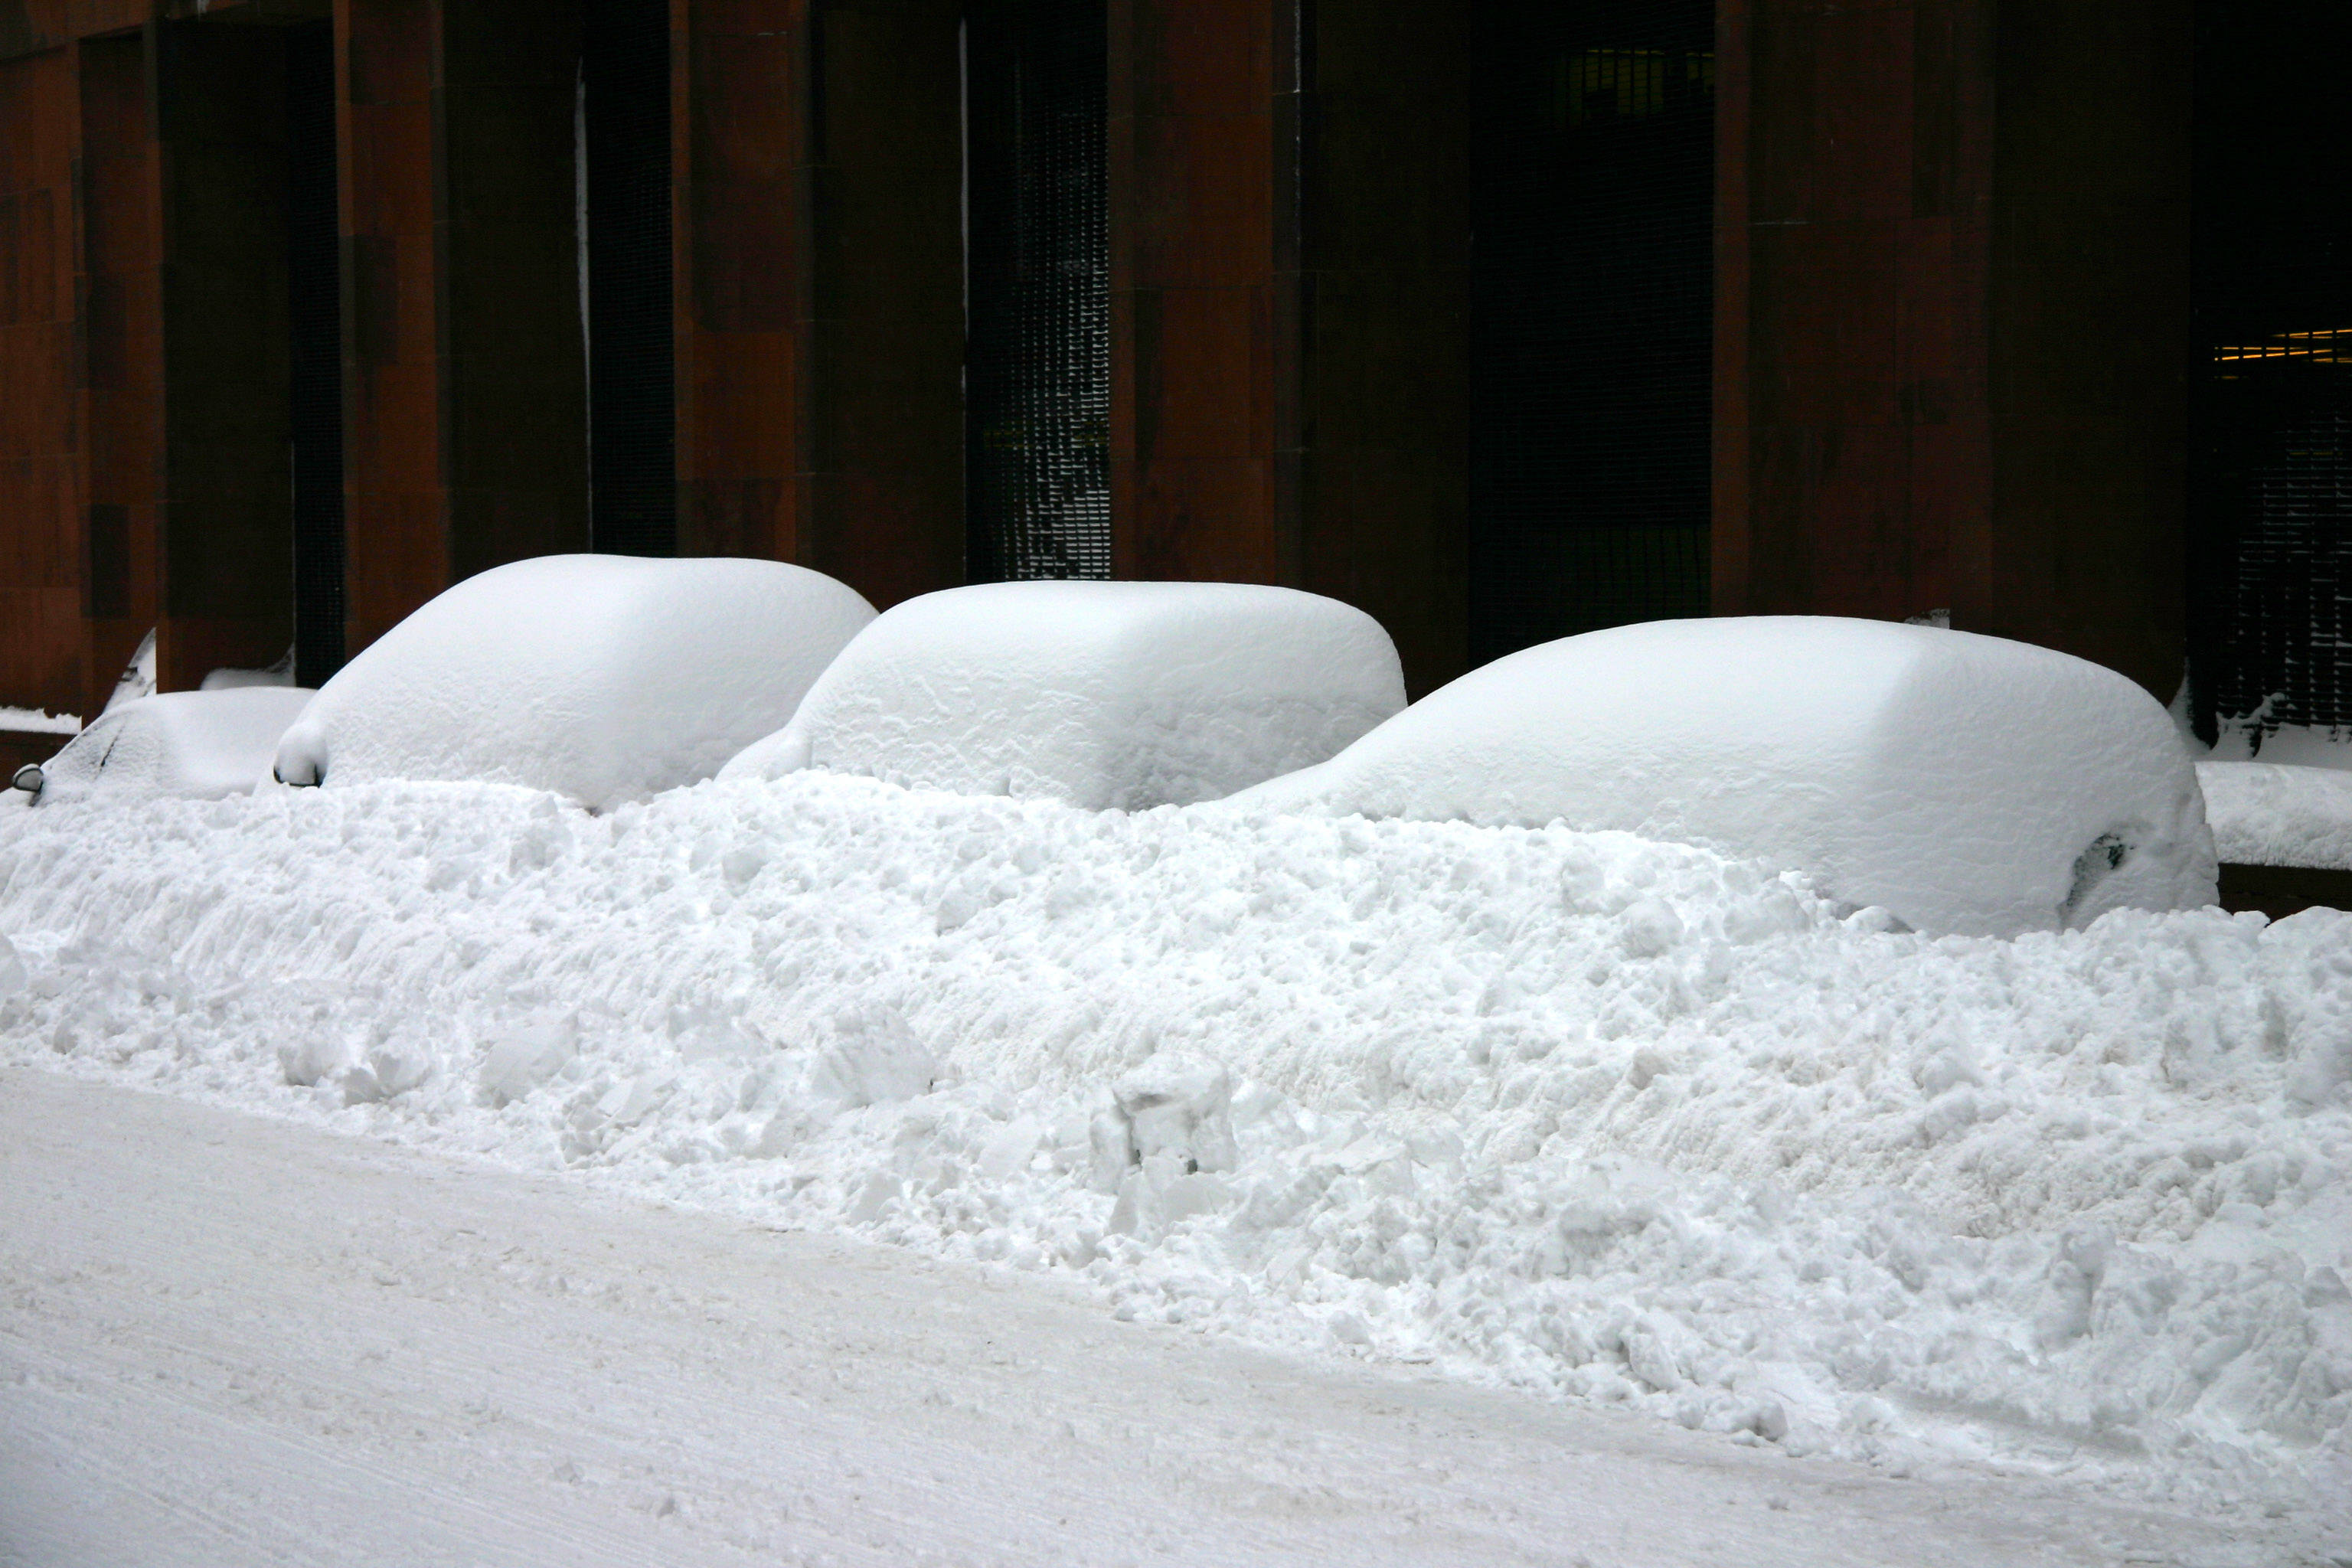 Blizzard of 06 - Buried Cars by NYU Library